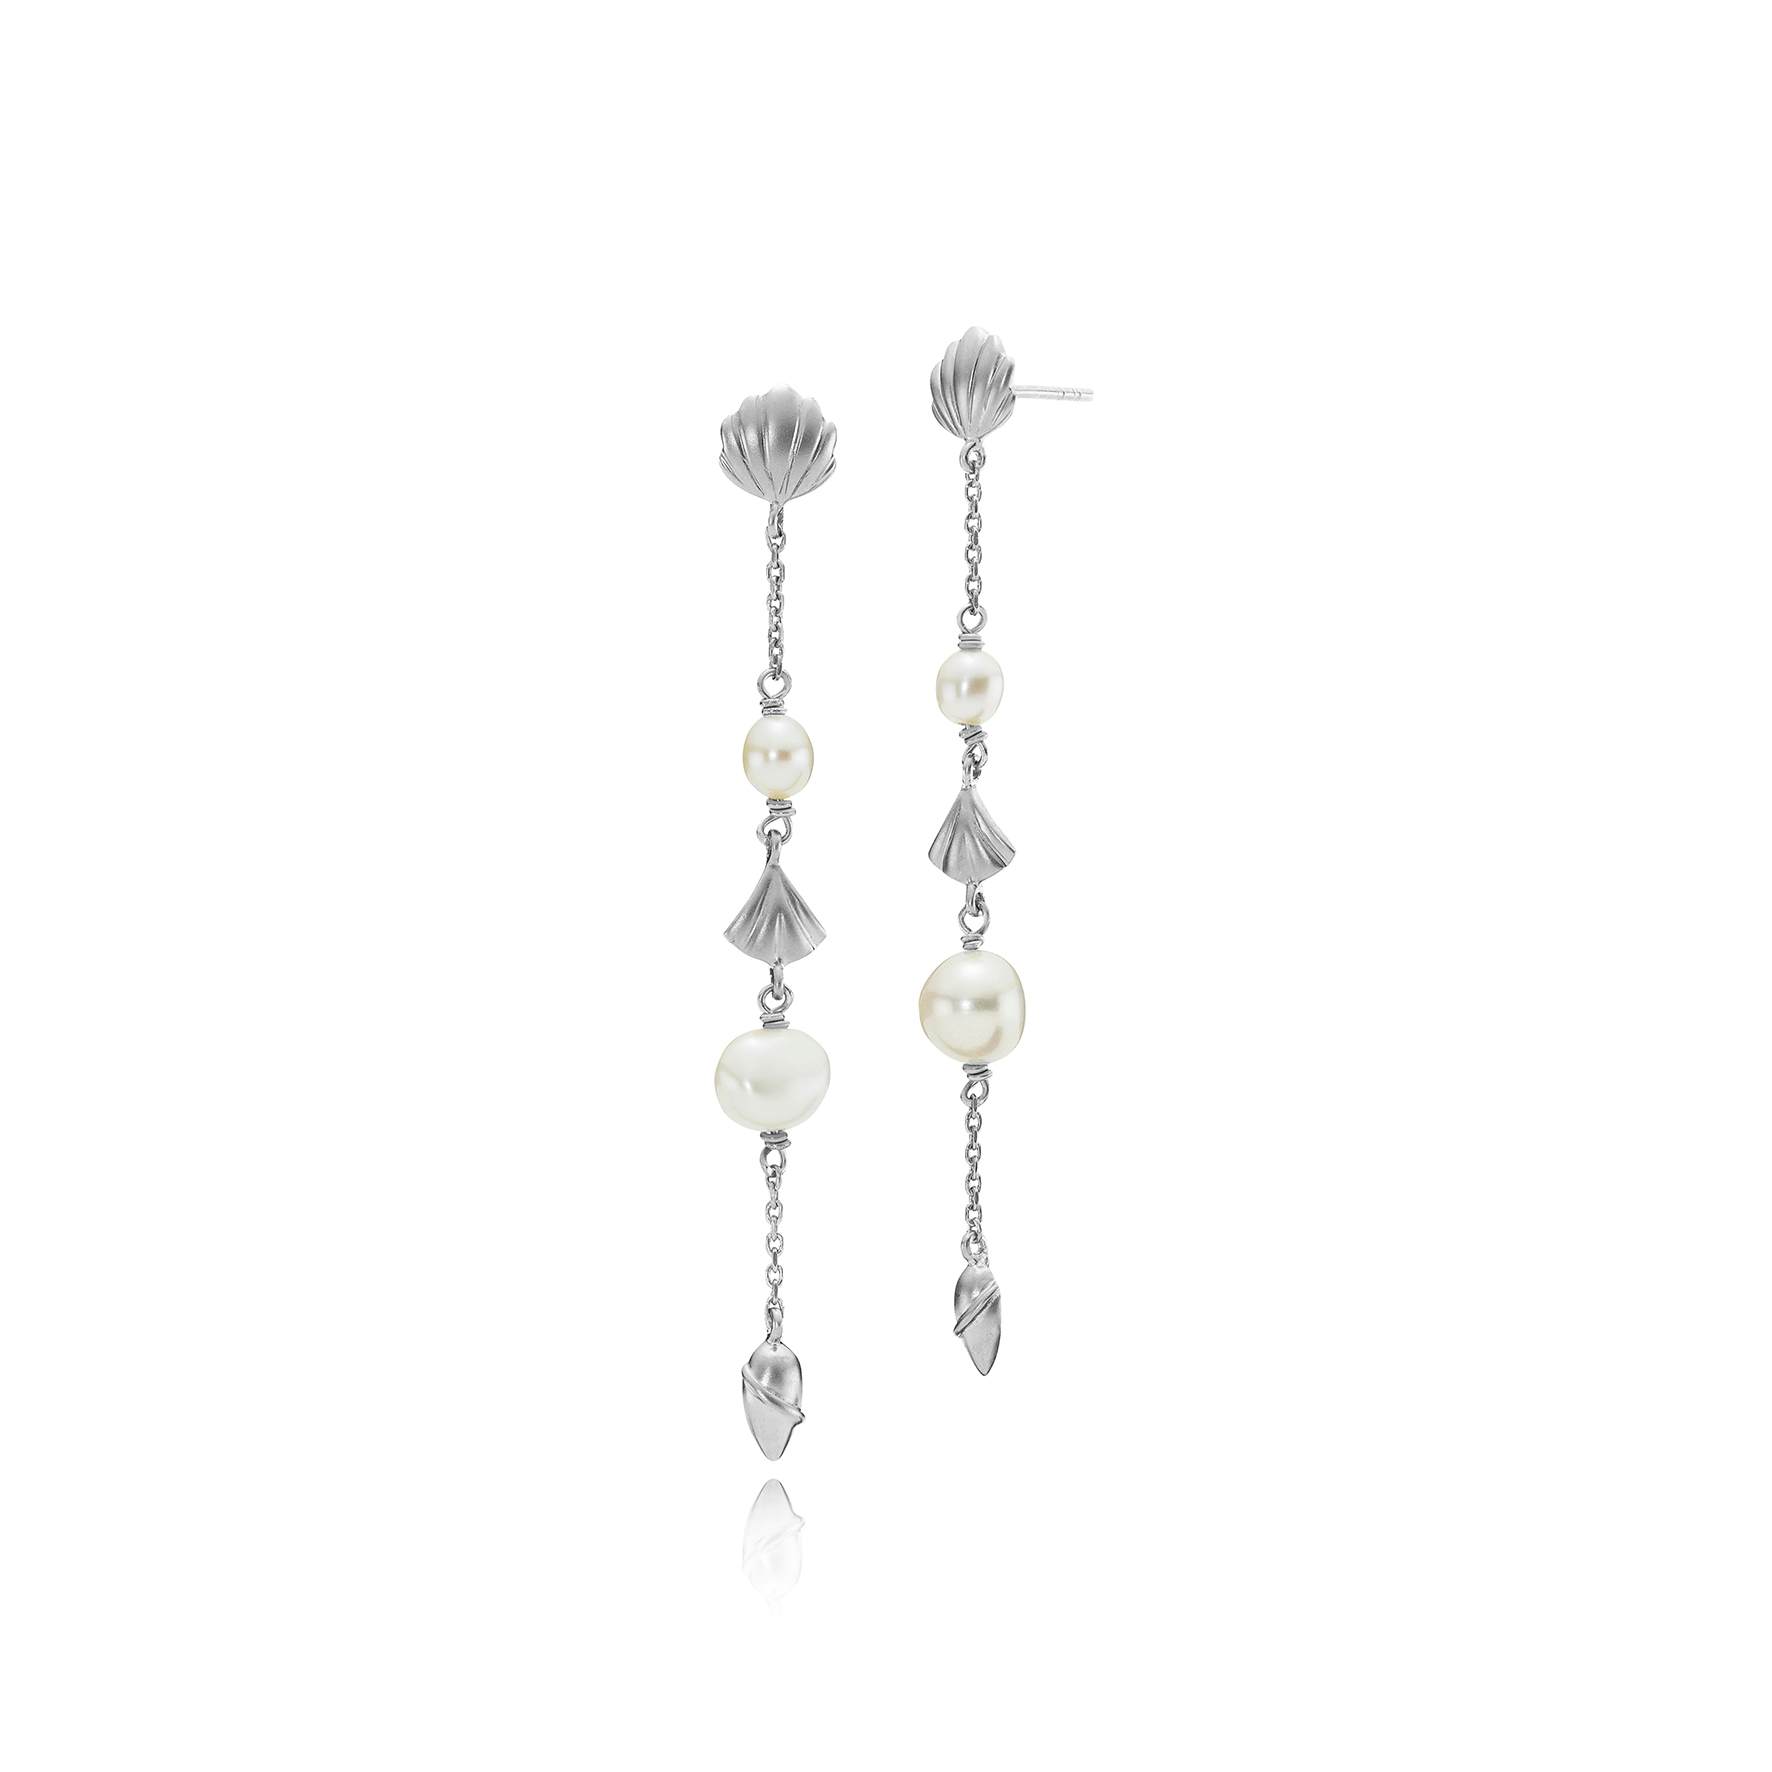 Isabella White Long Earrings von Izabel Camille in Silber Sterling 925